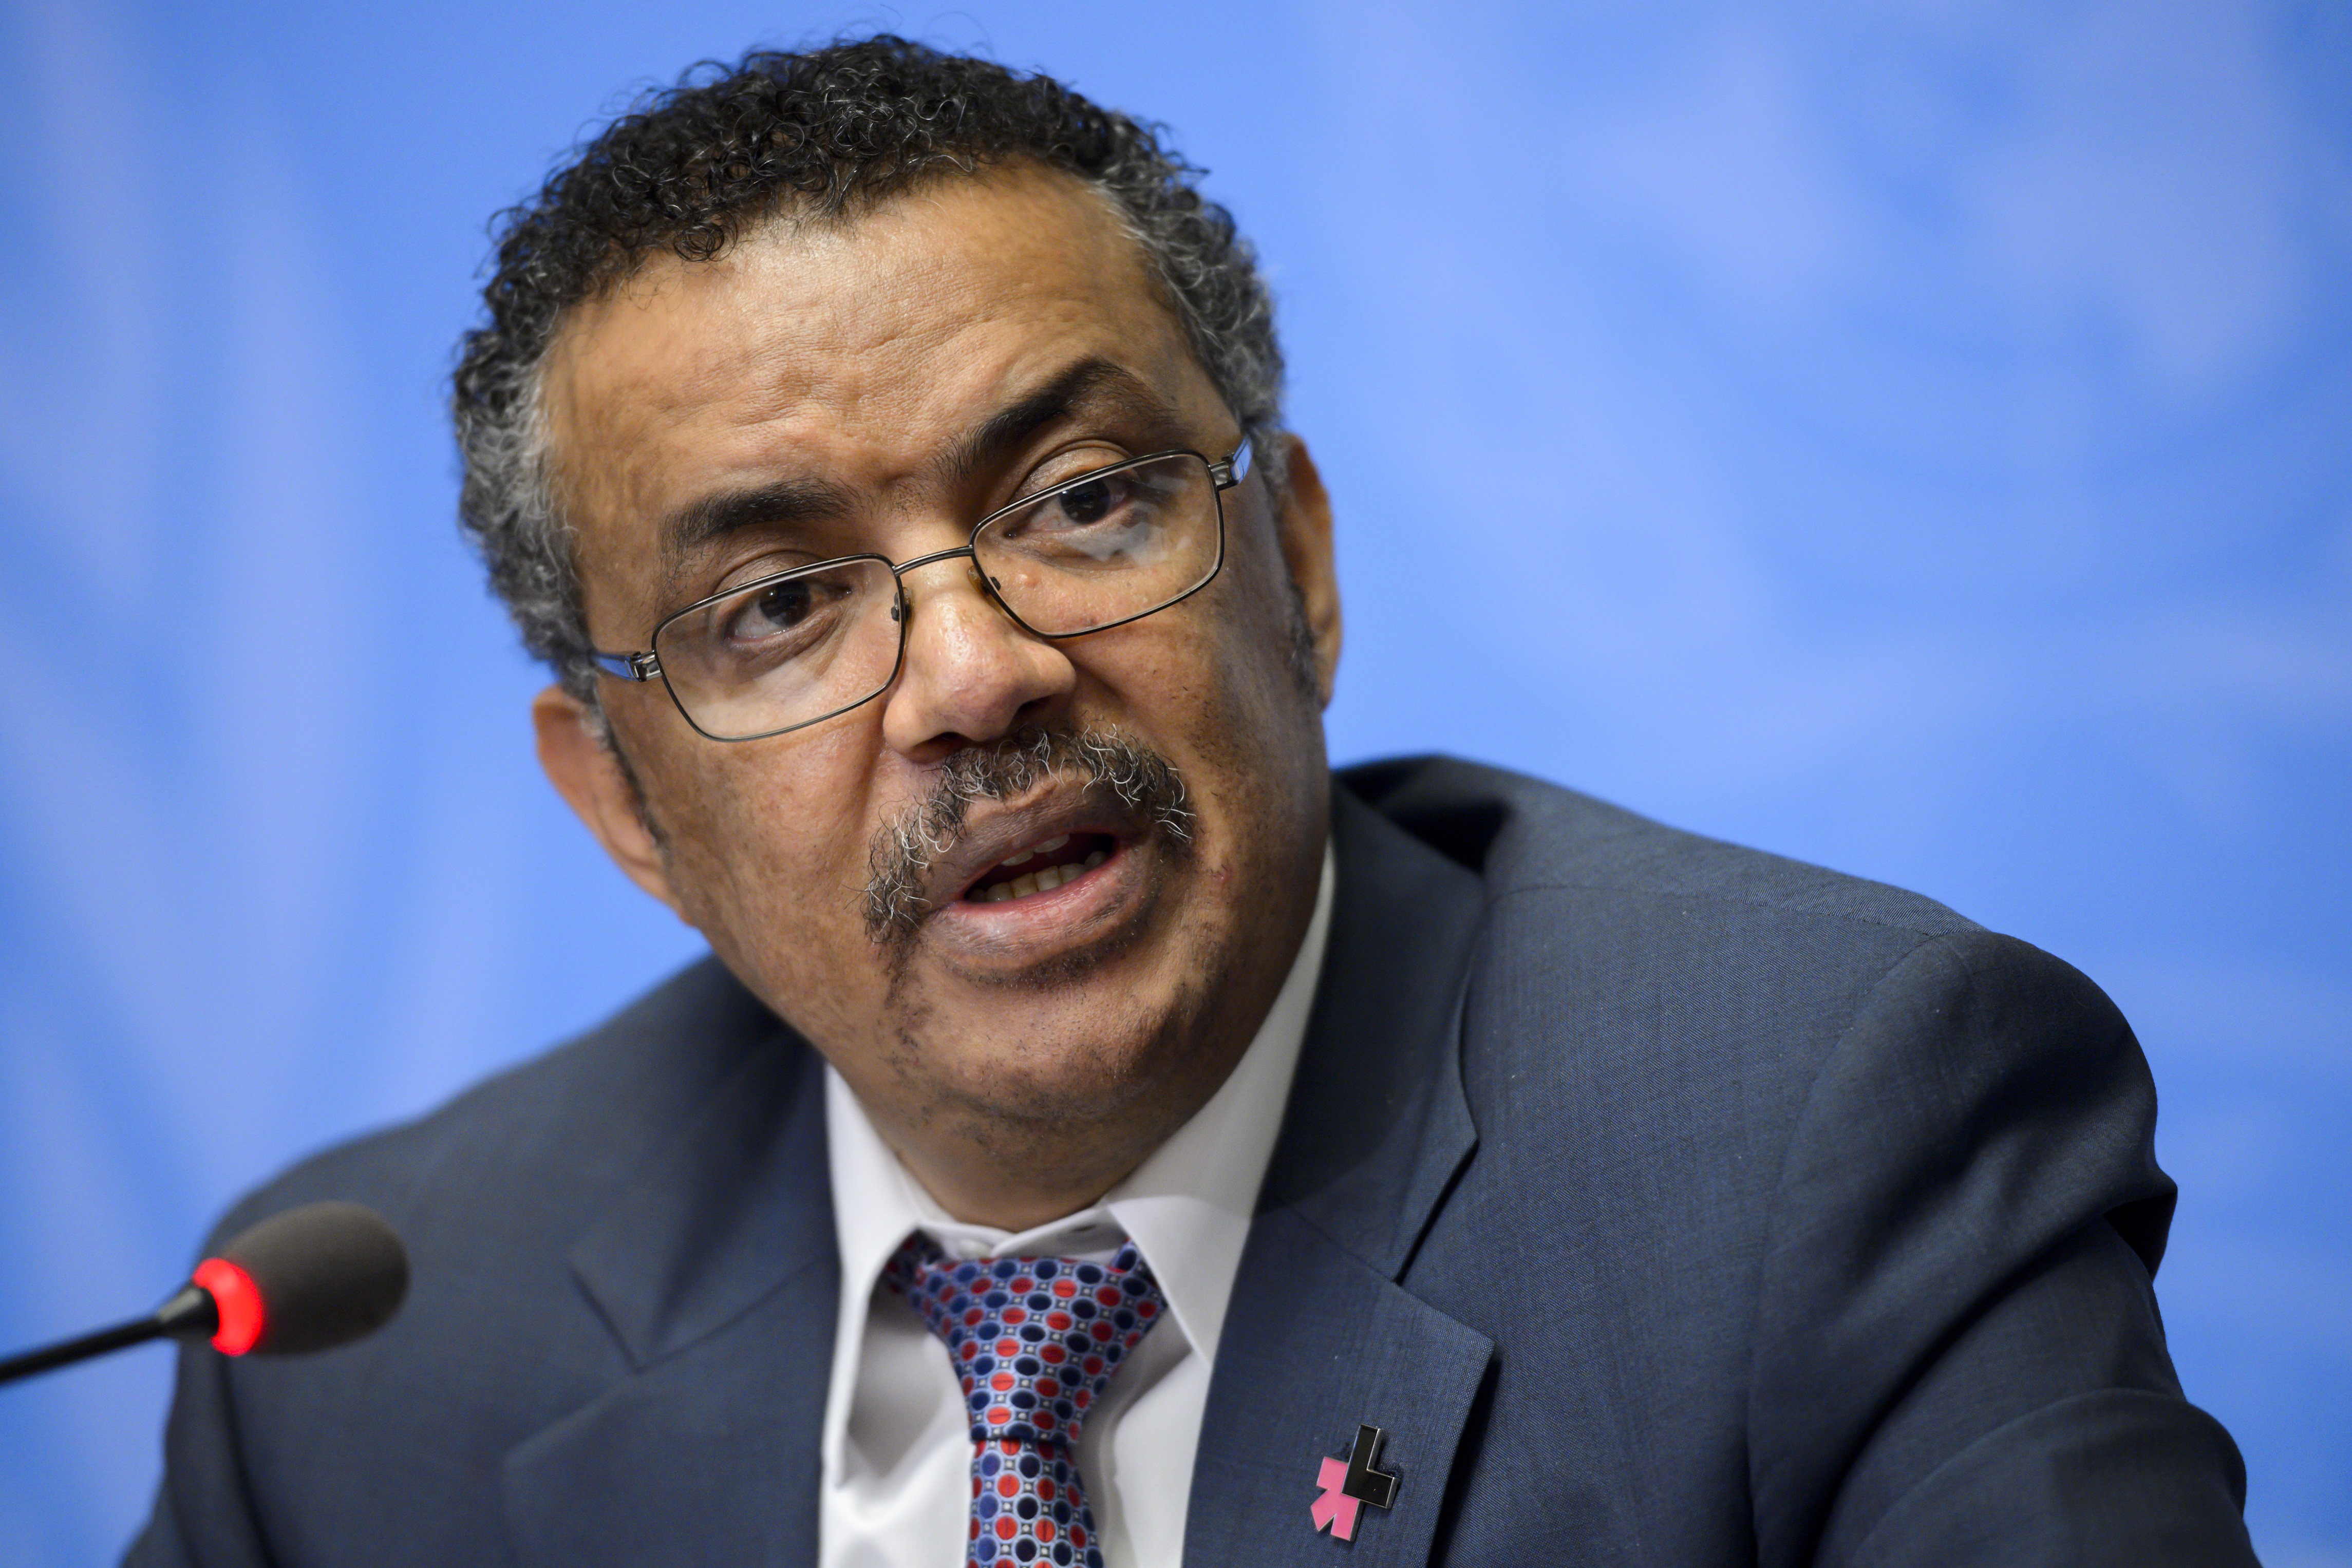 Ethiopian Minister of Foreign Affairs Tedros Adhanom Ghebreyesus attends a press conference launching his candidacy to the post of Director General of the World Health Organization (WHO). Tedros won the election on Tuesday, May 23. (FABRICE COFFRINI—AFP/Getty Images)